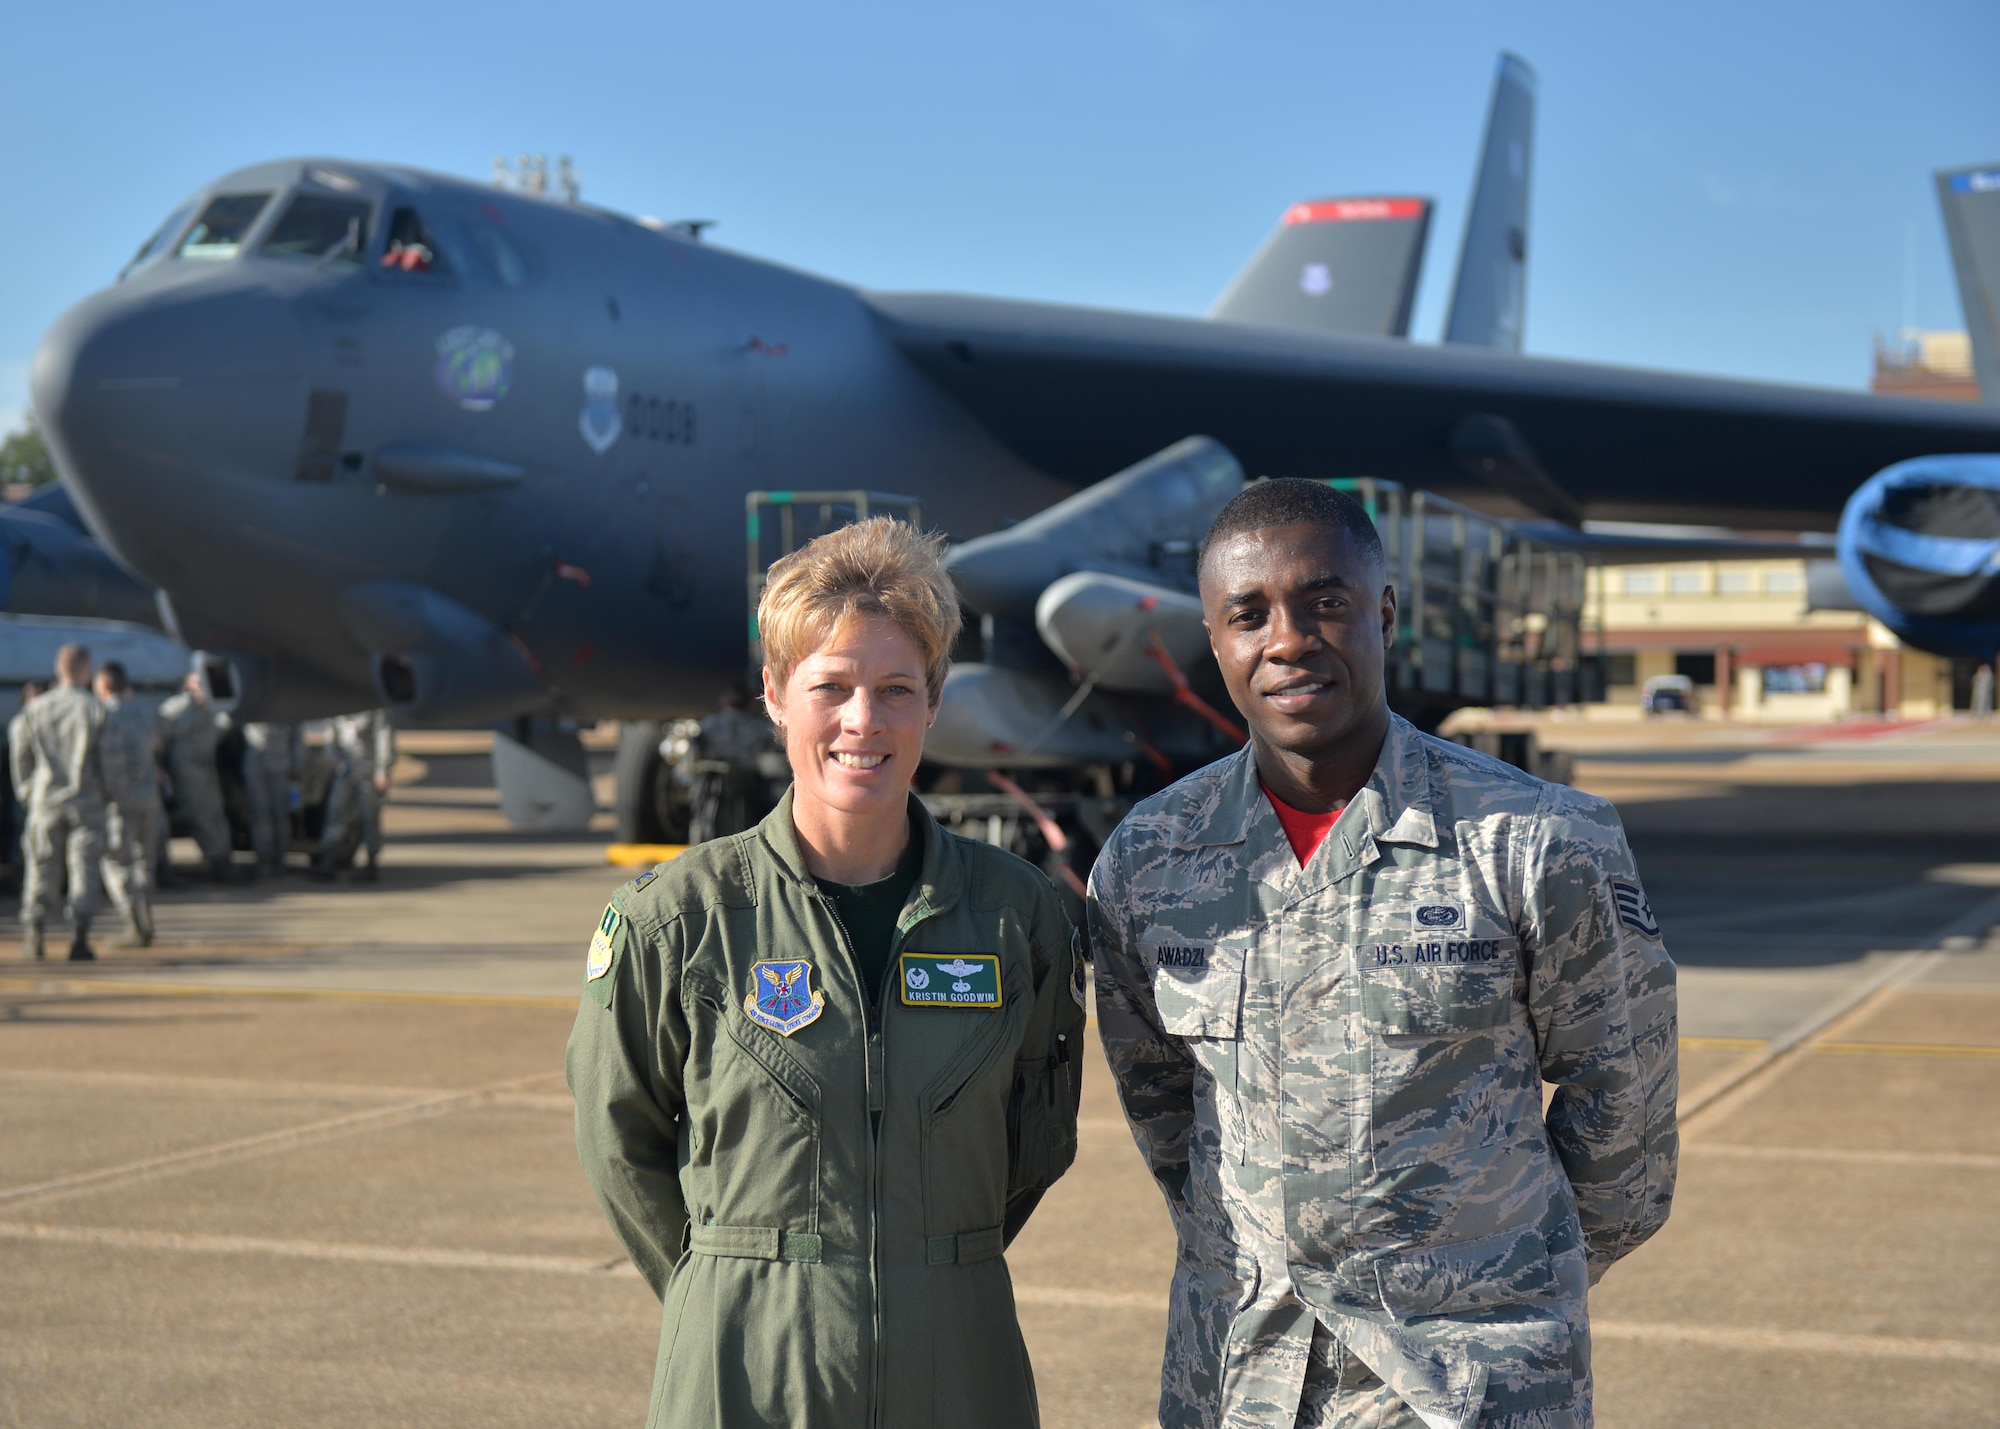 Col. Kristin Goodwin, 2nd Bomb Wing commander, and Staff Sgt. Desmond Awadzi, 2nd Force Support Squadron promotions NCO-in-charge, pose for a photo in front of a B-52 Stratofortress at Barksdale Air Force Base, La., Oct. 16, 2015. Awadzi has been personally selected by Chief of Staff of the Air Force Gen. Mark Welsh for a slot at Officer Training School under the Senior Leader Enlisted Commissioning Program. (U.S. Air Force photo/ Airman 1st Class Mozer O. DaCunha)